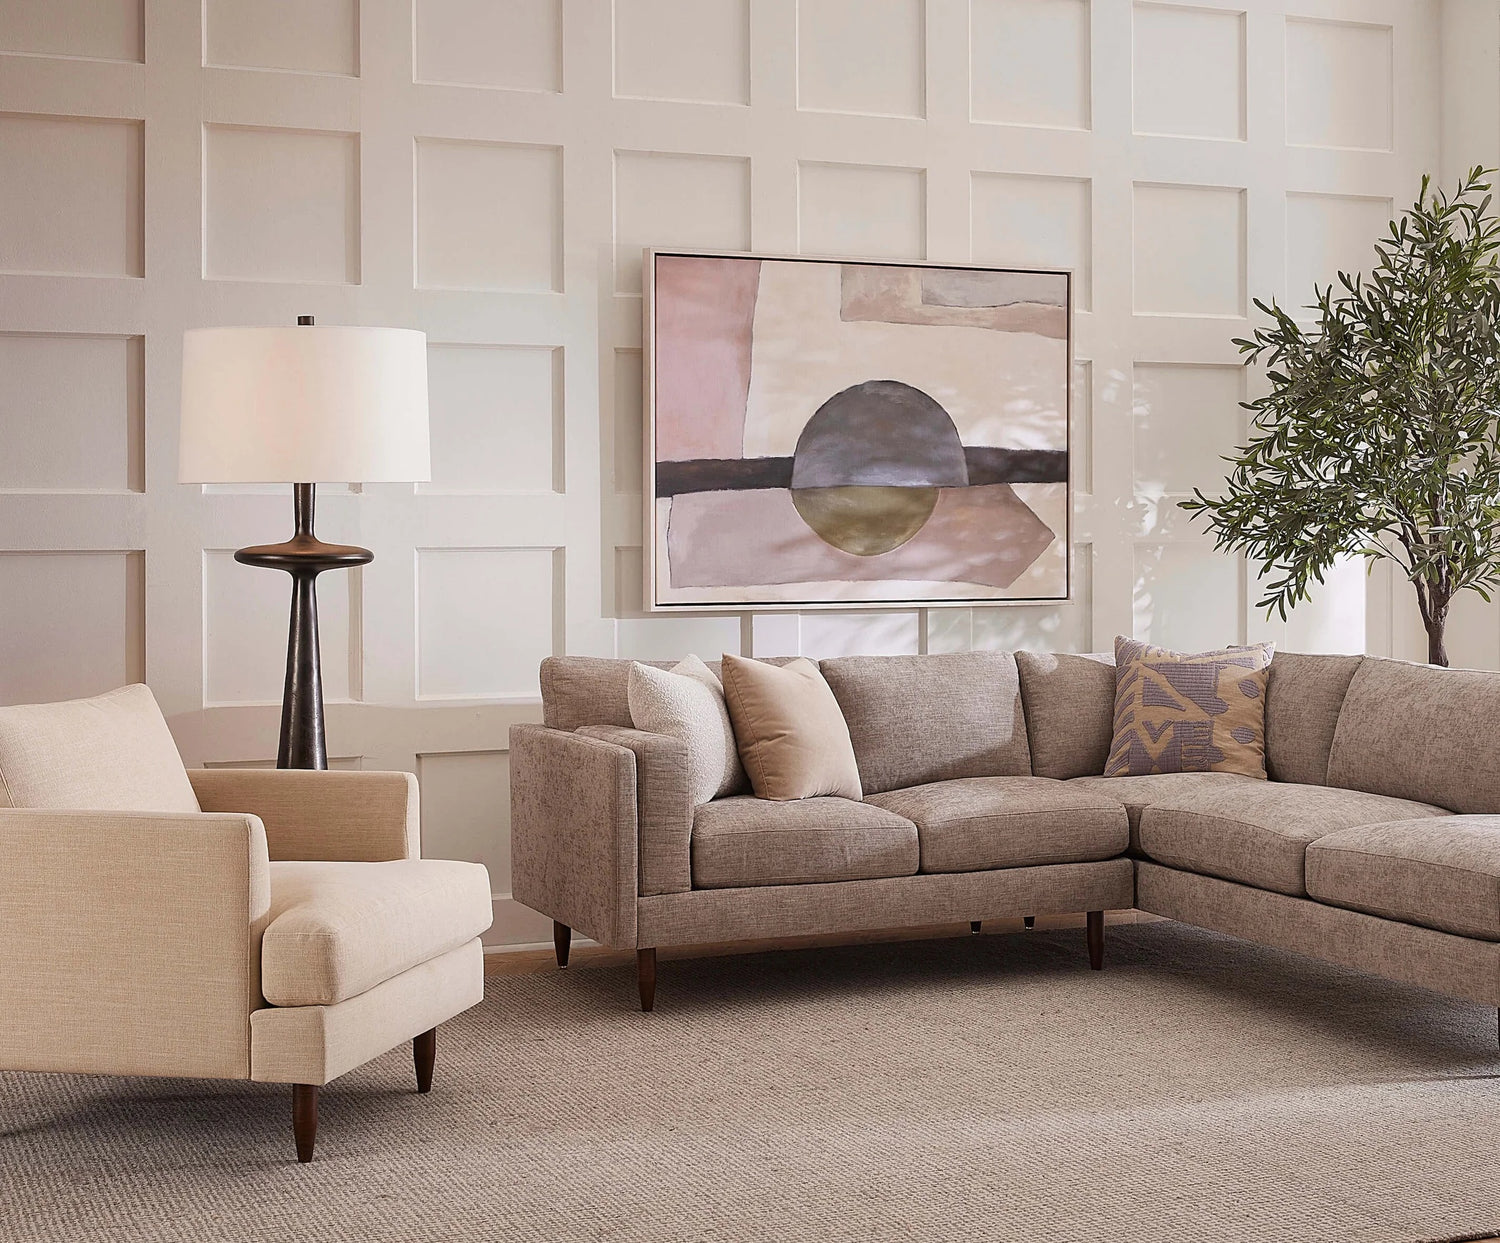 A modern living room with a light beige sectional sofa, a matching armchair, and a tall floor lamp. The walls feature a grid-like panel design and a large abstract painting. An artificial tree adds a touch of greenery. The space is carpeted in a neutral tone.